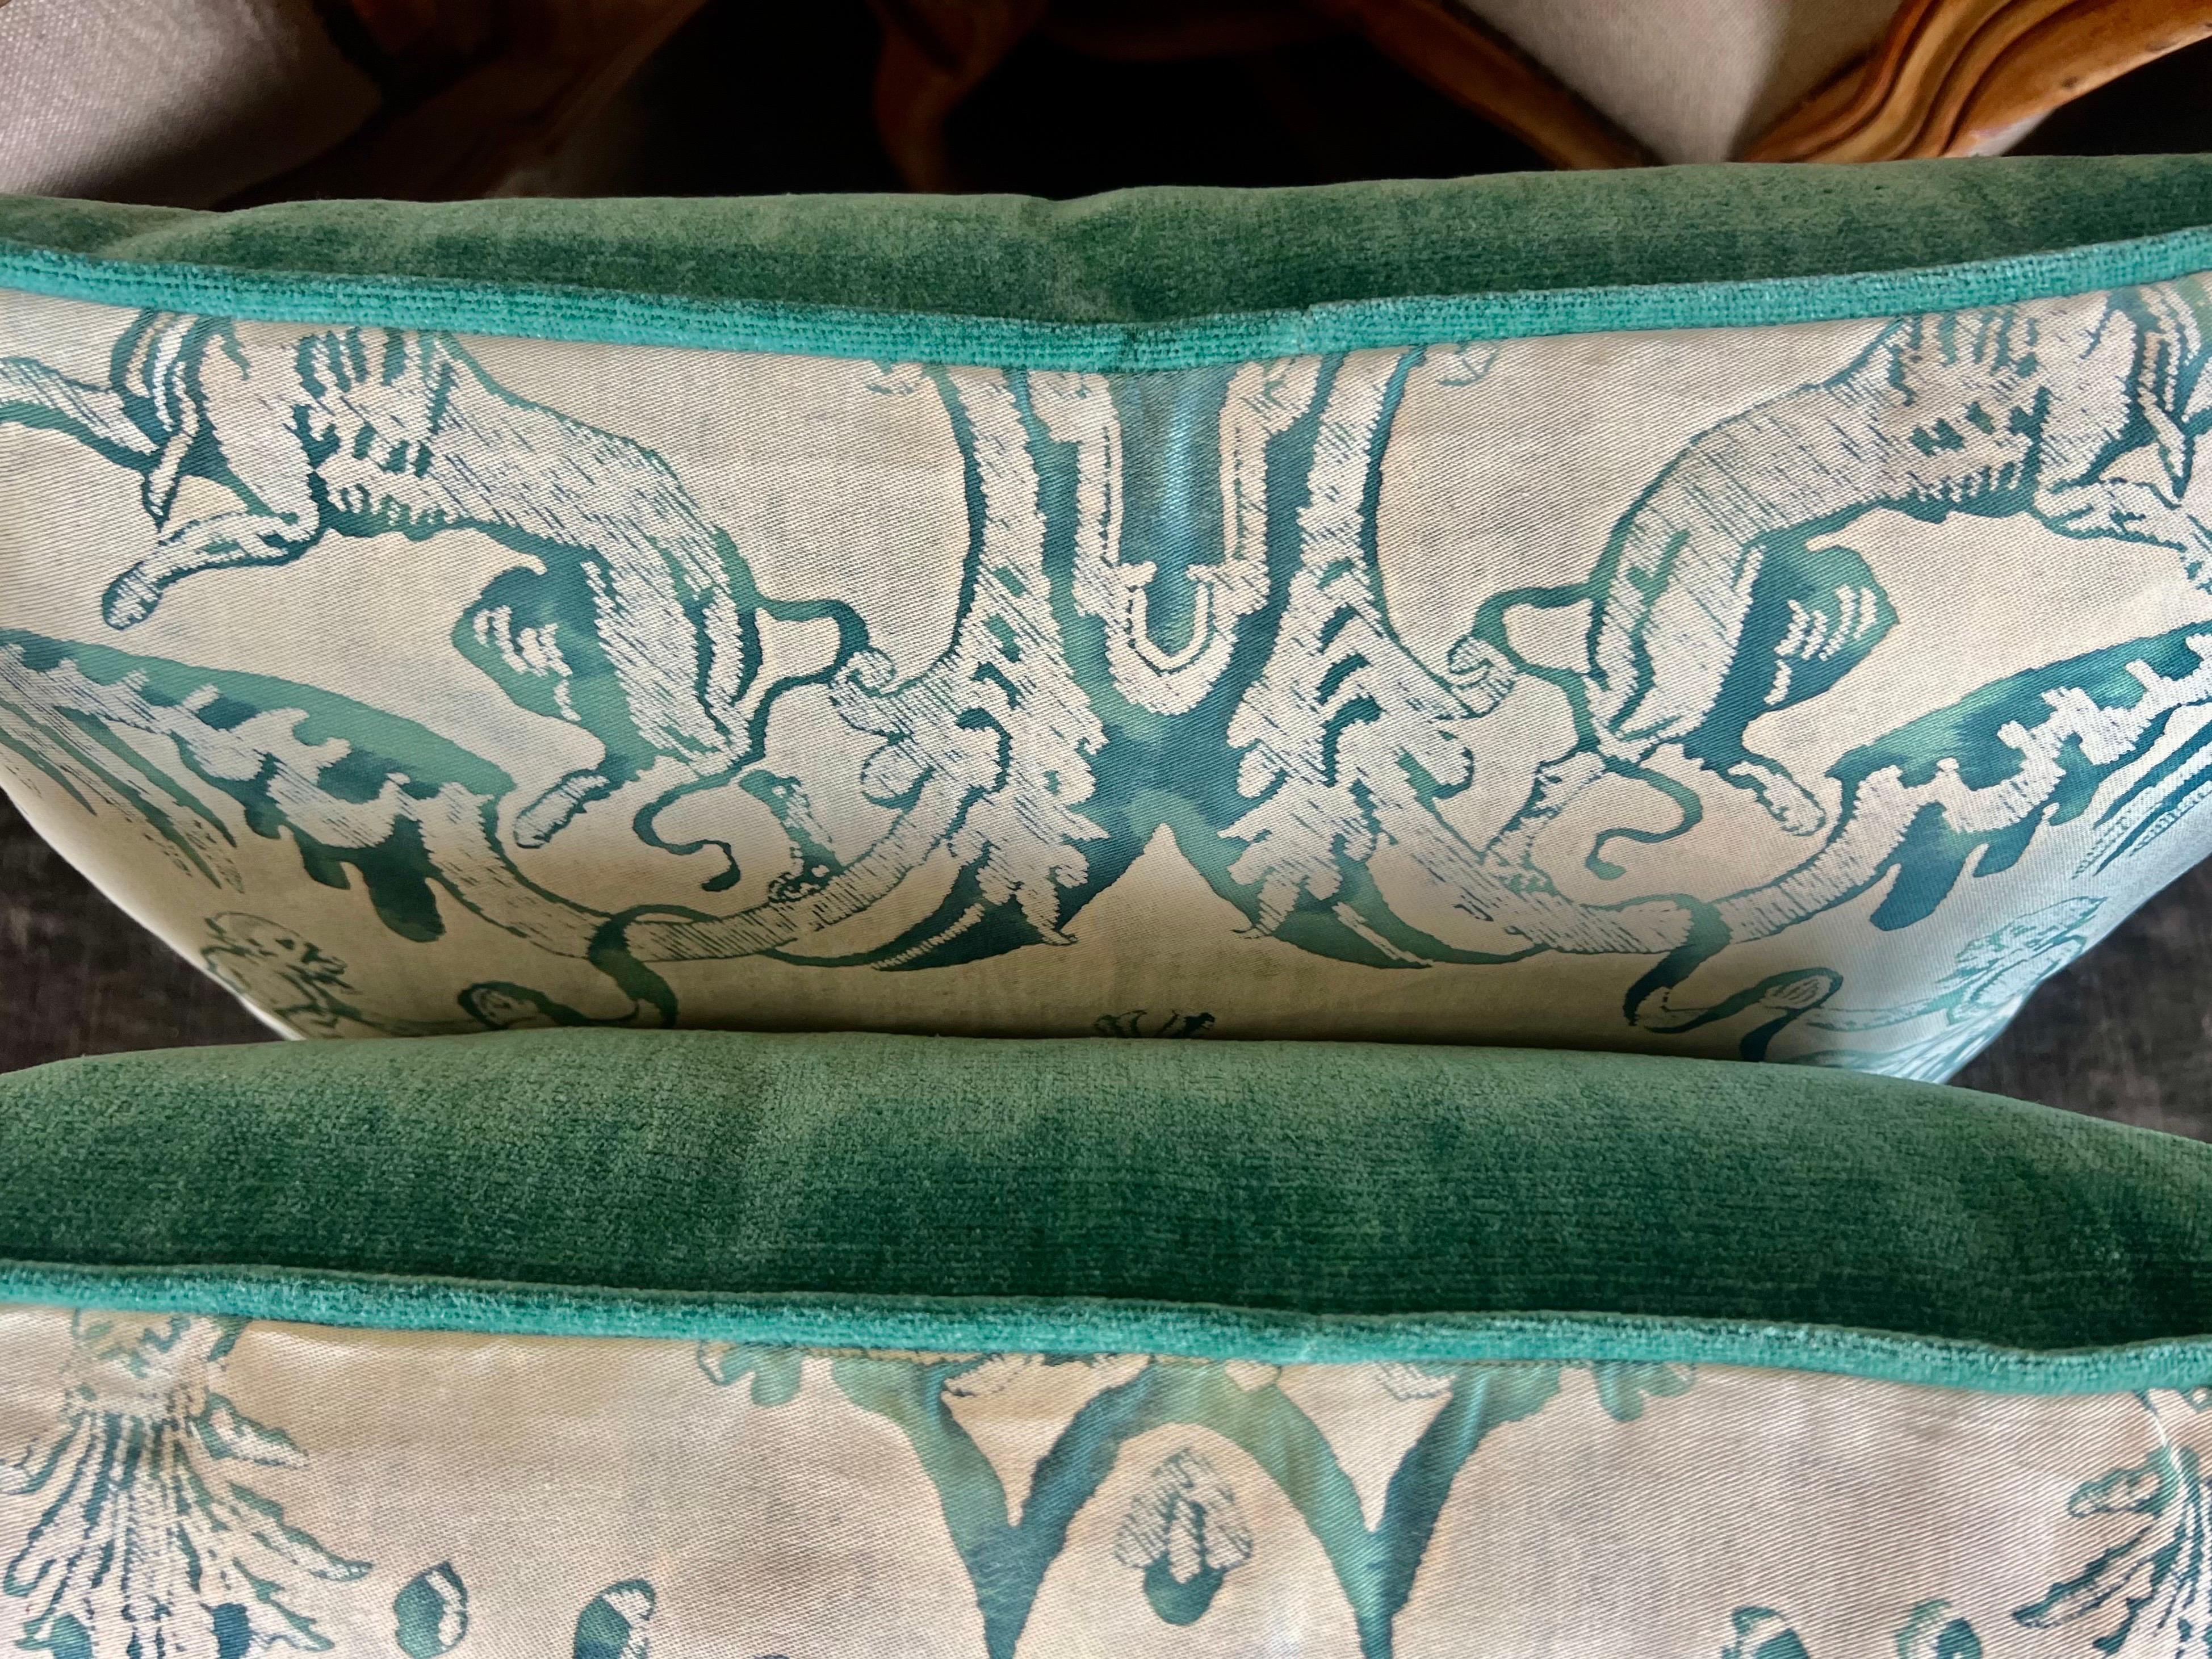 A pair of custom Fortuny textile pillows adorned with the Manzianno pattern in colors of peacock and beige.  The intricate Italian design is complemented by velvet backs in the same peacock coloration and finished with self cord detail, and down